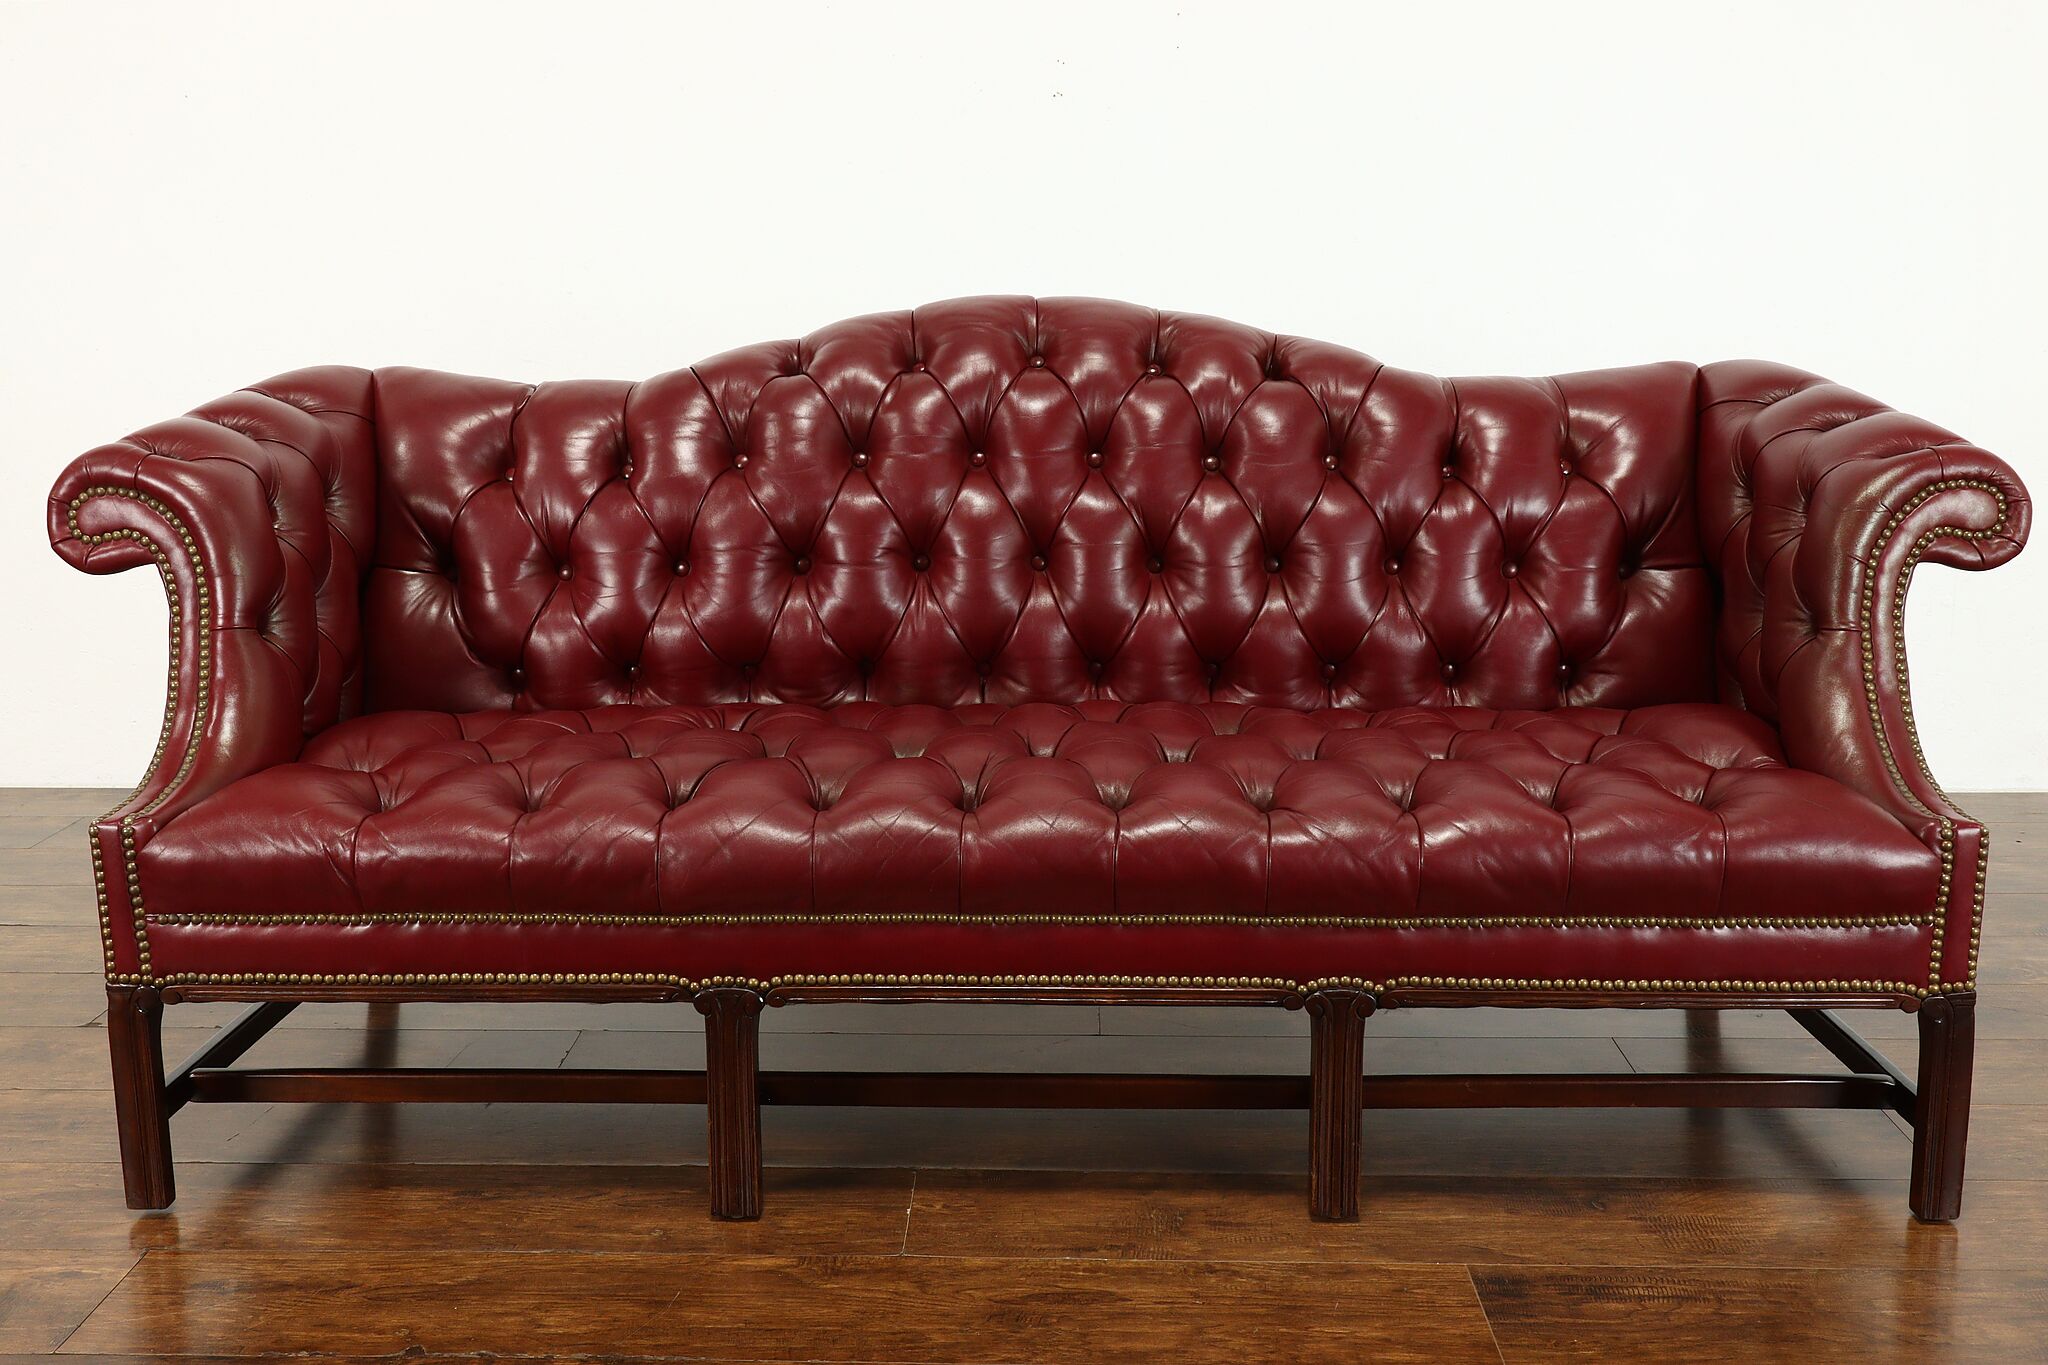 Tufted Leather Chesterfield Sofa